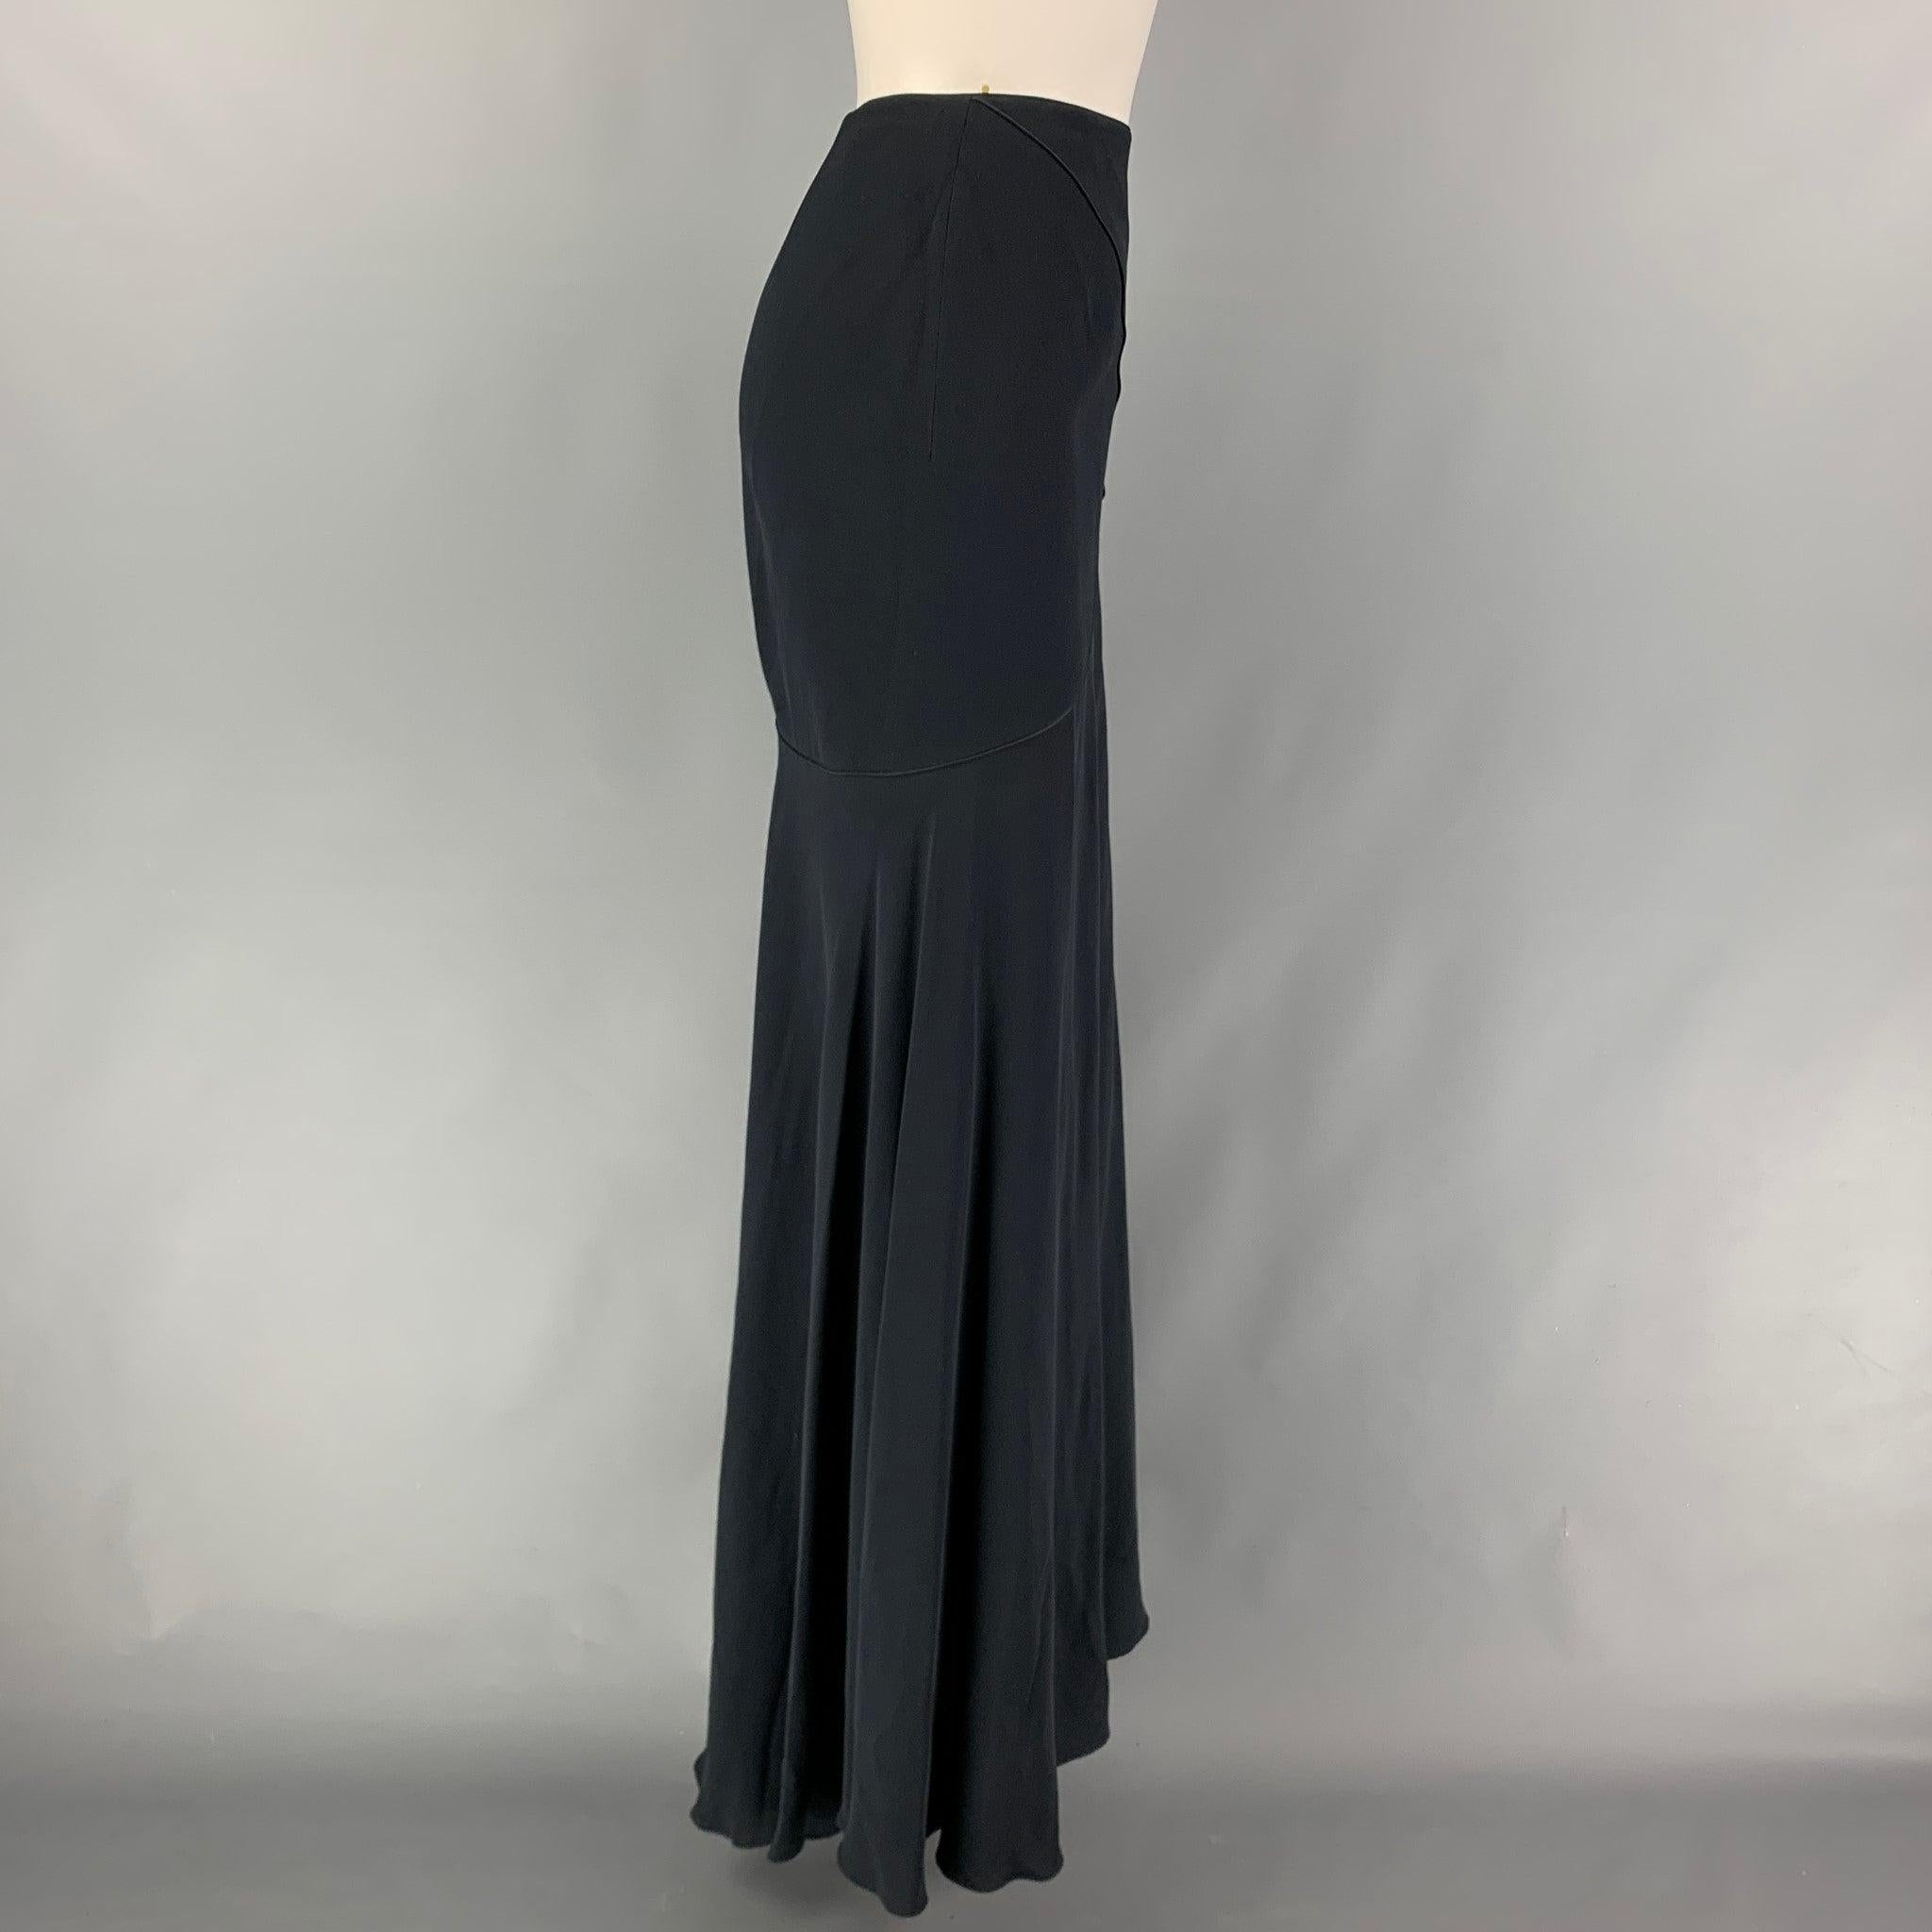 VALENTINO skirt comes in a black acetate blend featuring top stitching, front slit, and a back zipper closure.
Very Good
Pre-Owned Condition. 

Marked:   8 

Measurements: 
  Waist: 30 inches  Hip: 36 inches  Length: 48.5 inches 
  
  
 
Reference: